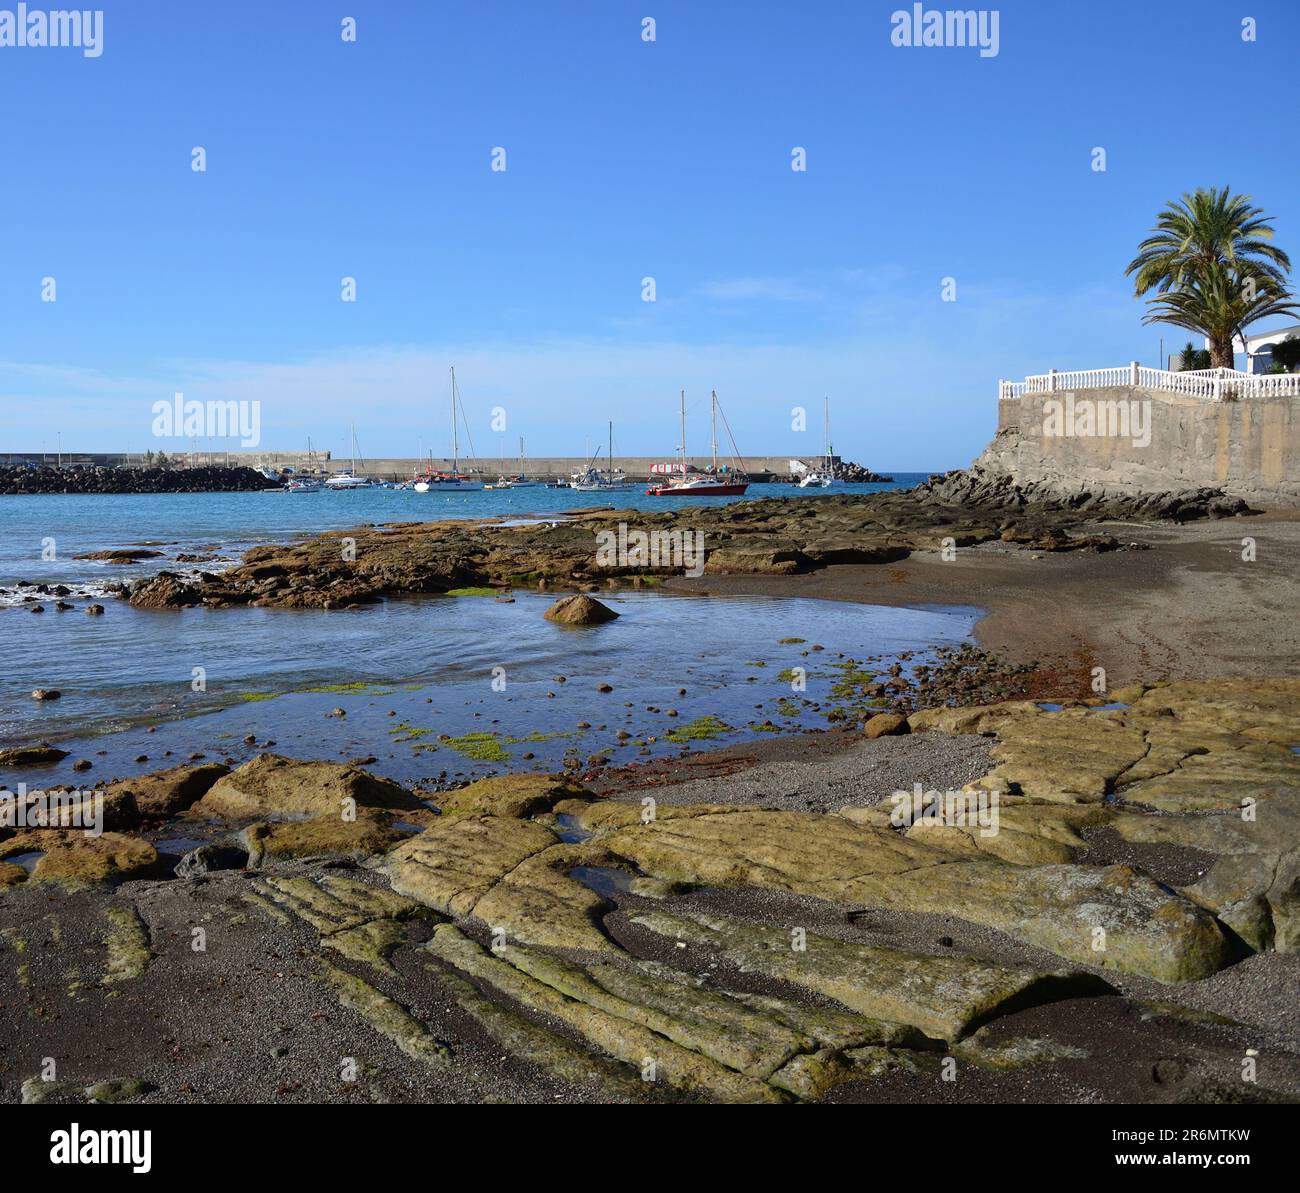 Beach at low tide in foreground, port in the background and blue sky, coast of Arguineguin, Gran Canaria, Canary Islands Stock Photo